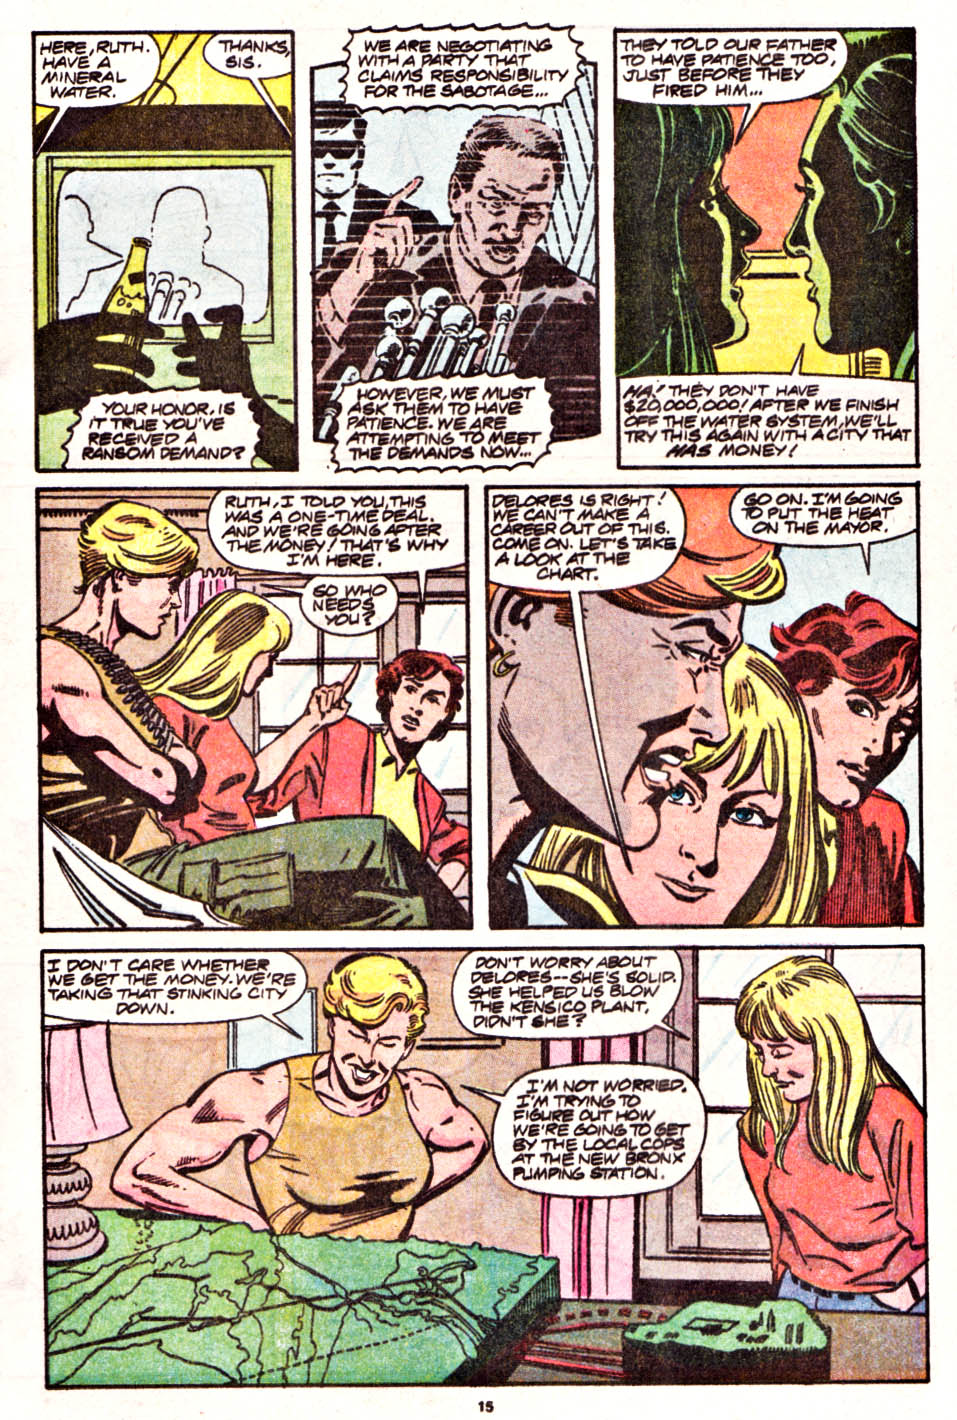 The Punisher (1987) issue 41 - Should a Gentleman offer a Tiparillo to a Lady - Page 13